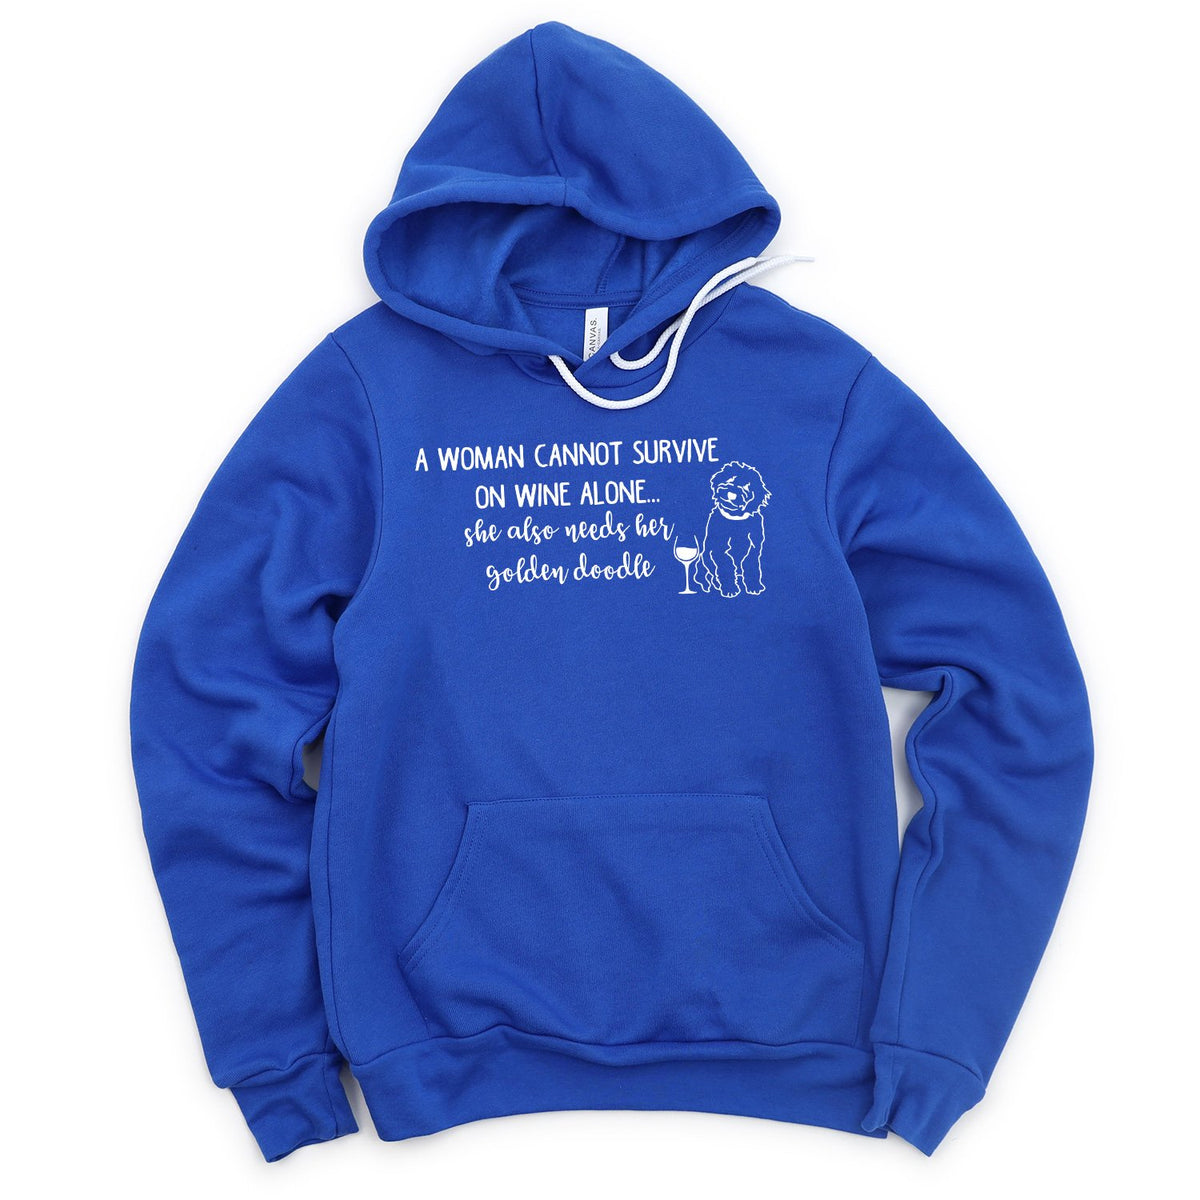 A Woman Cannot Survive on Wine Alone, She also Needs her Golden Doodle - Hoodie Sweatshirt